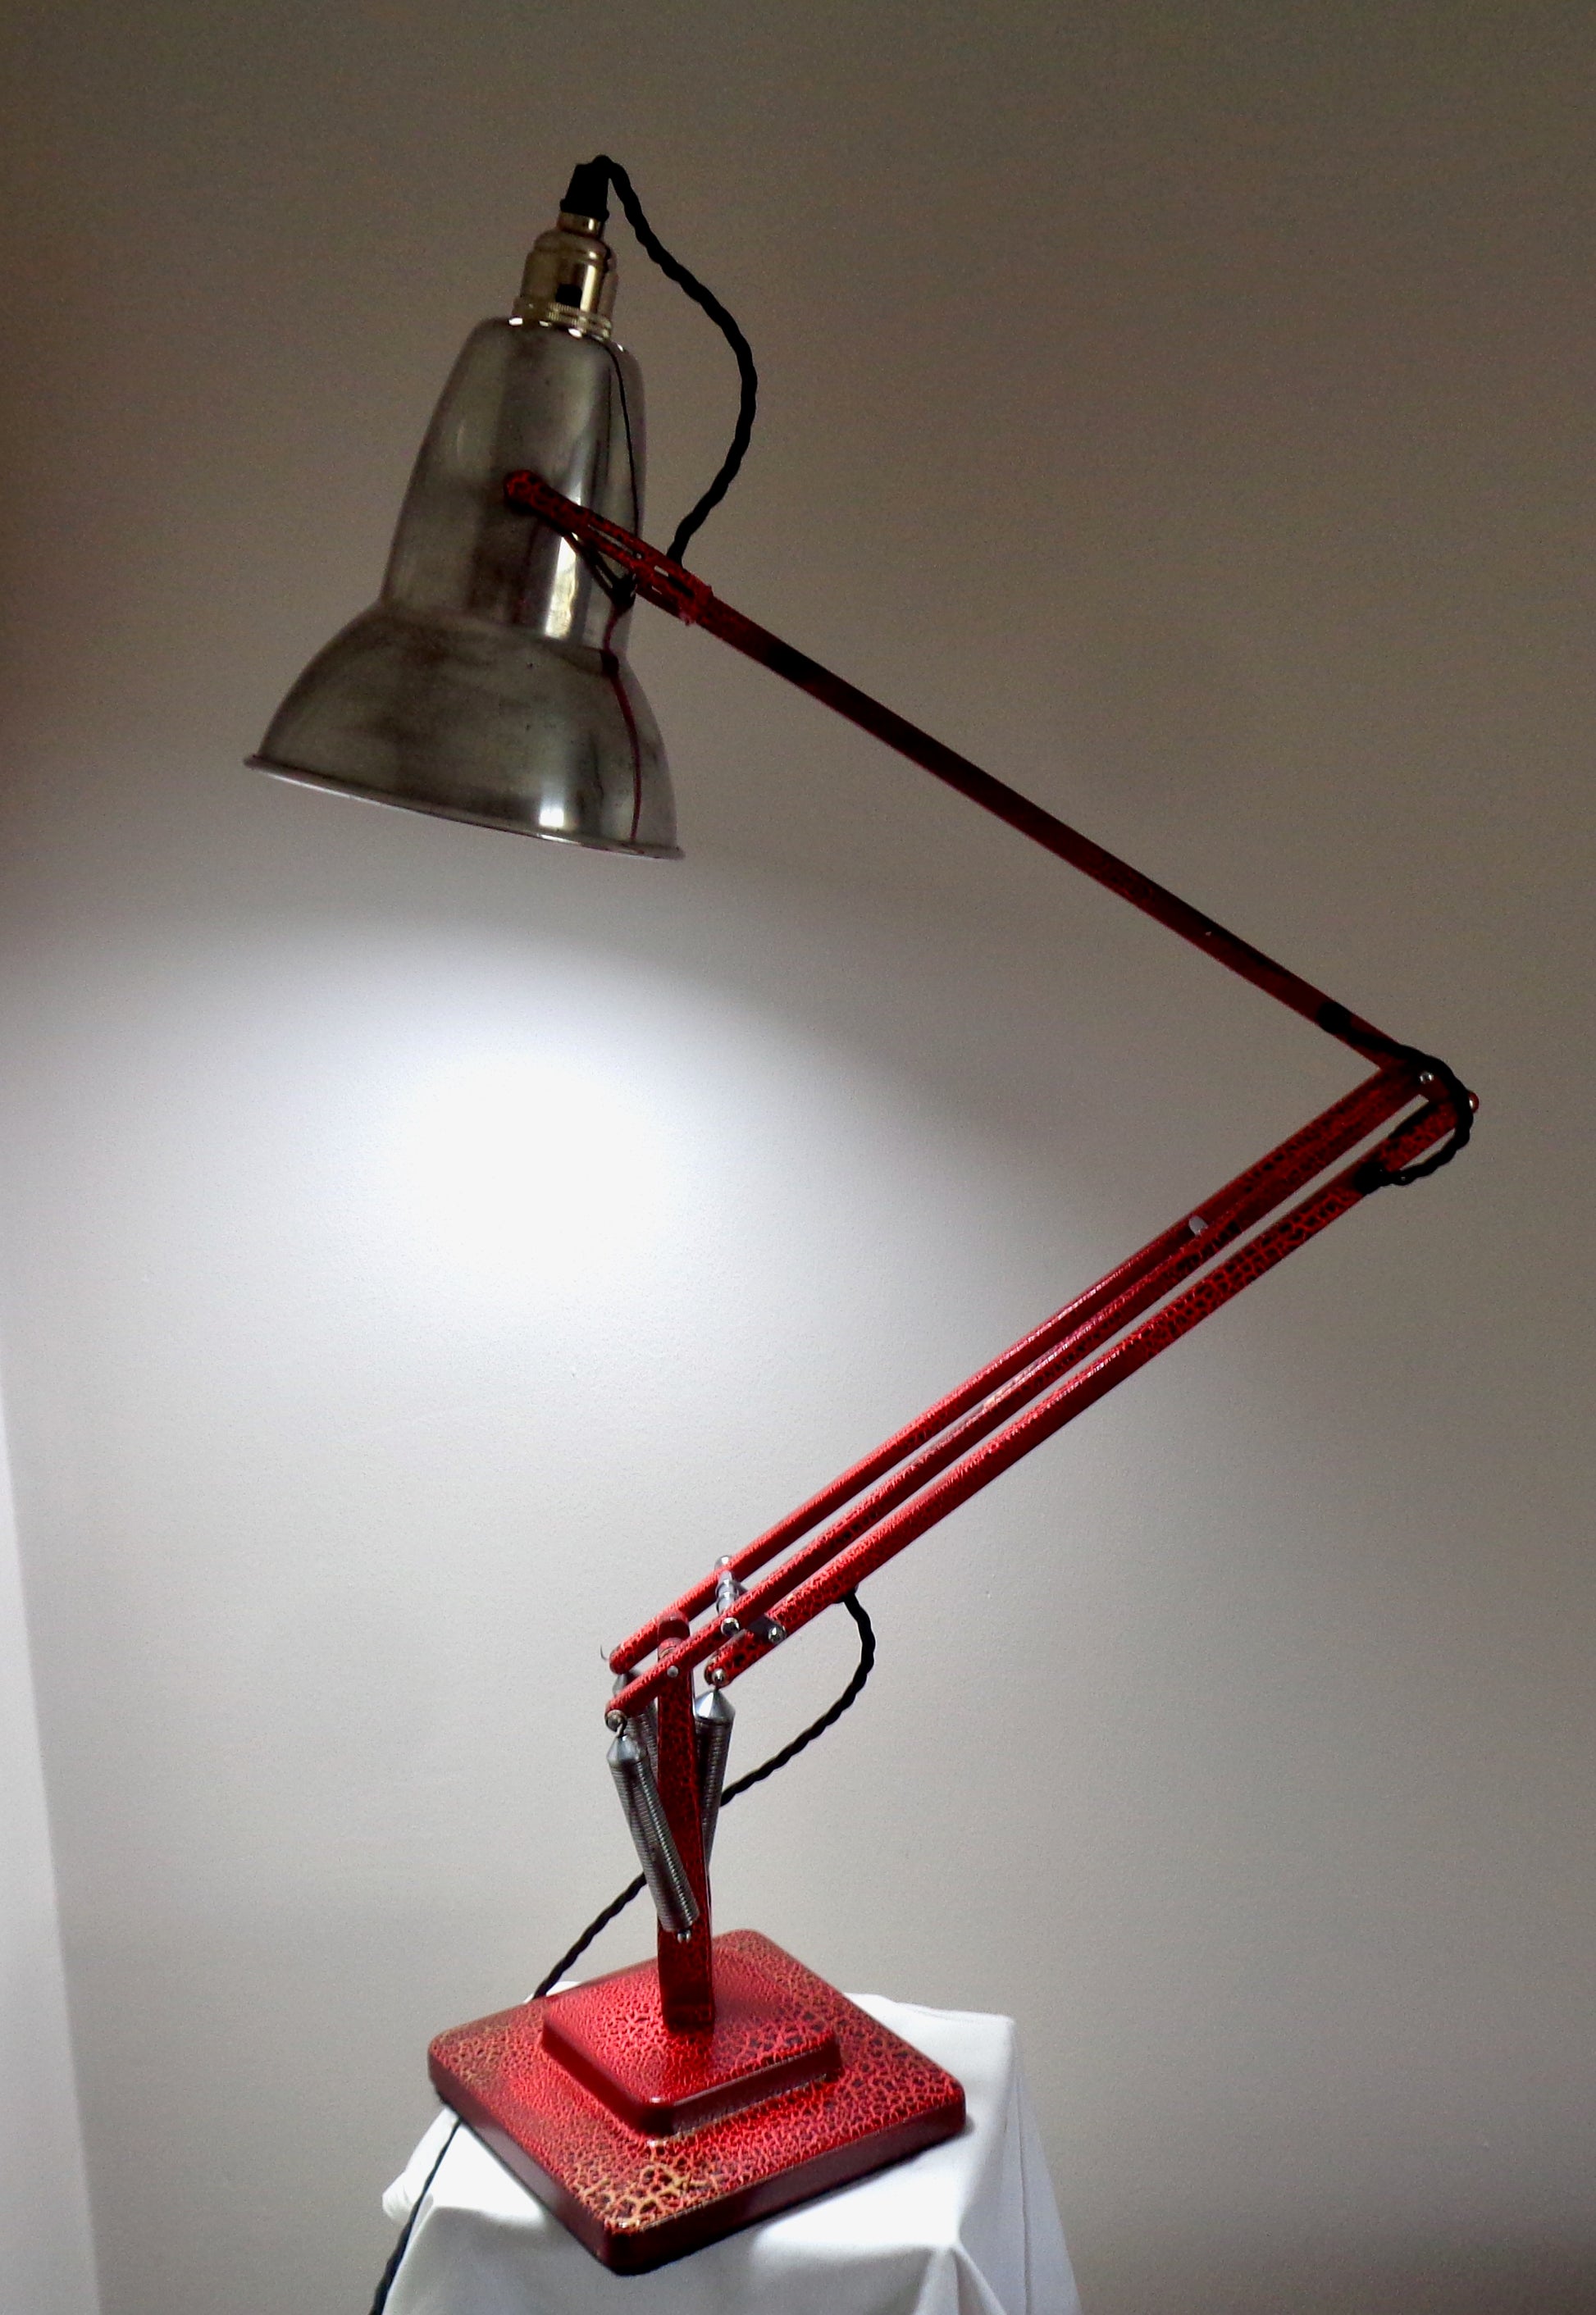 1950s Anglepoise 1227 Desk Lamp With Red Crackle Glaze Paint And Black Flex